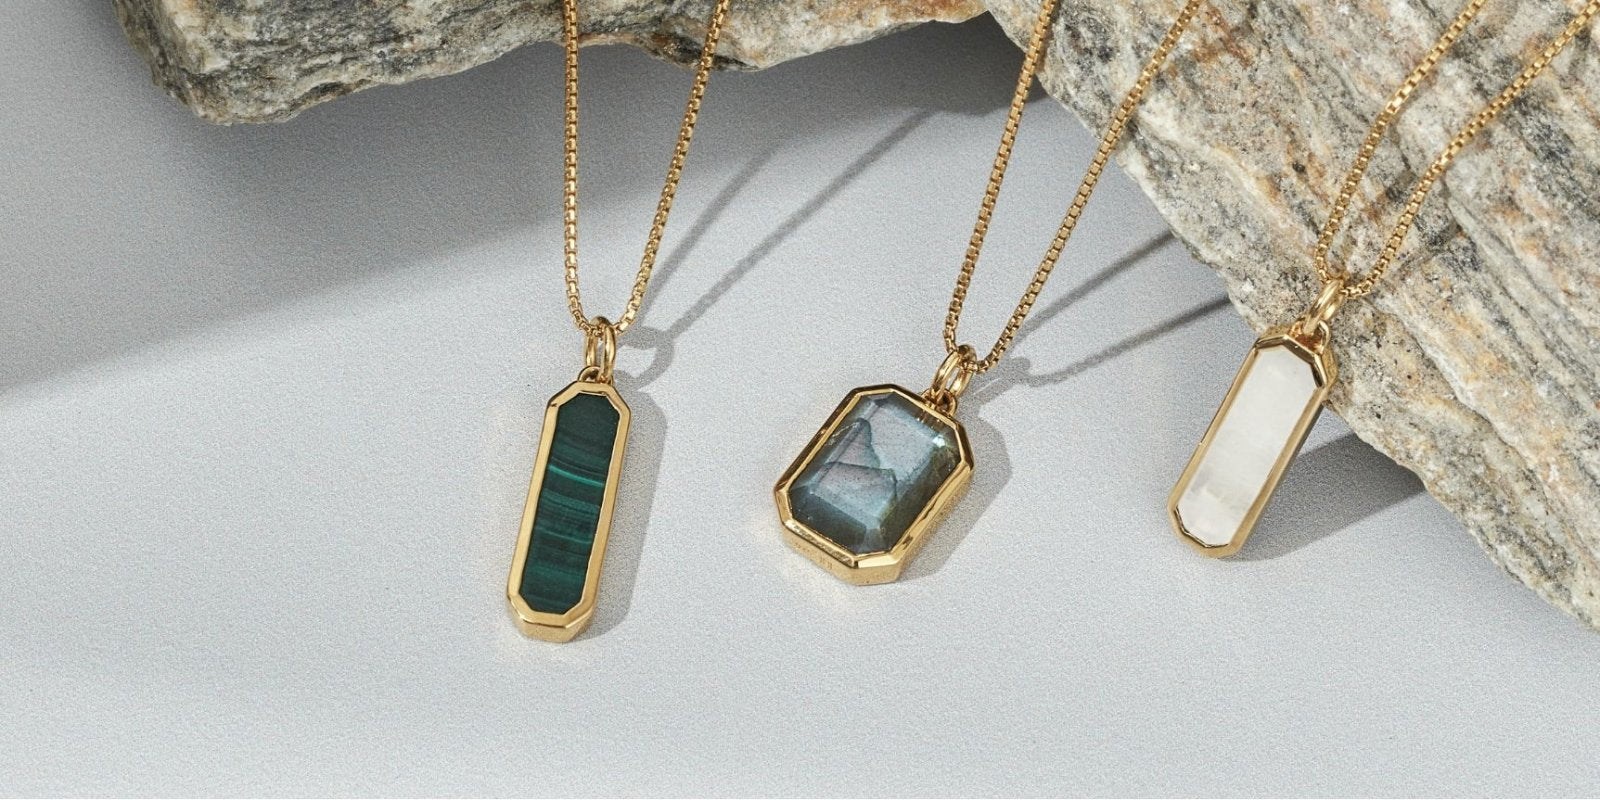 GOLD NECKLACES - 18k Gold & Recycled Silver gemstone jewellery